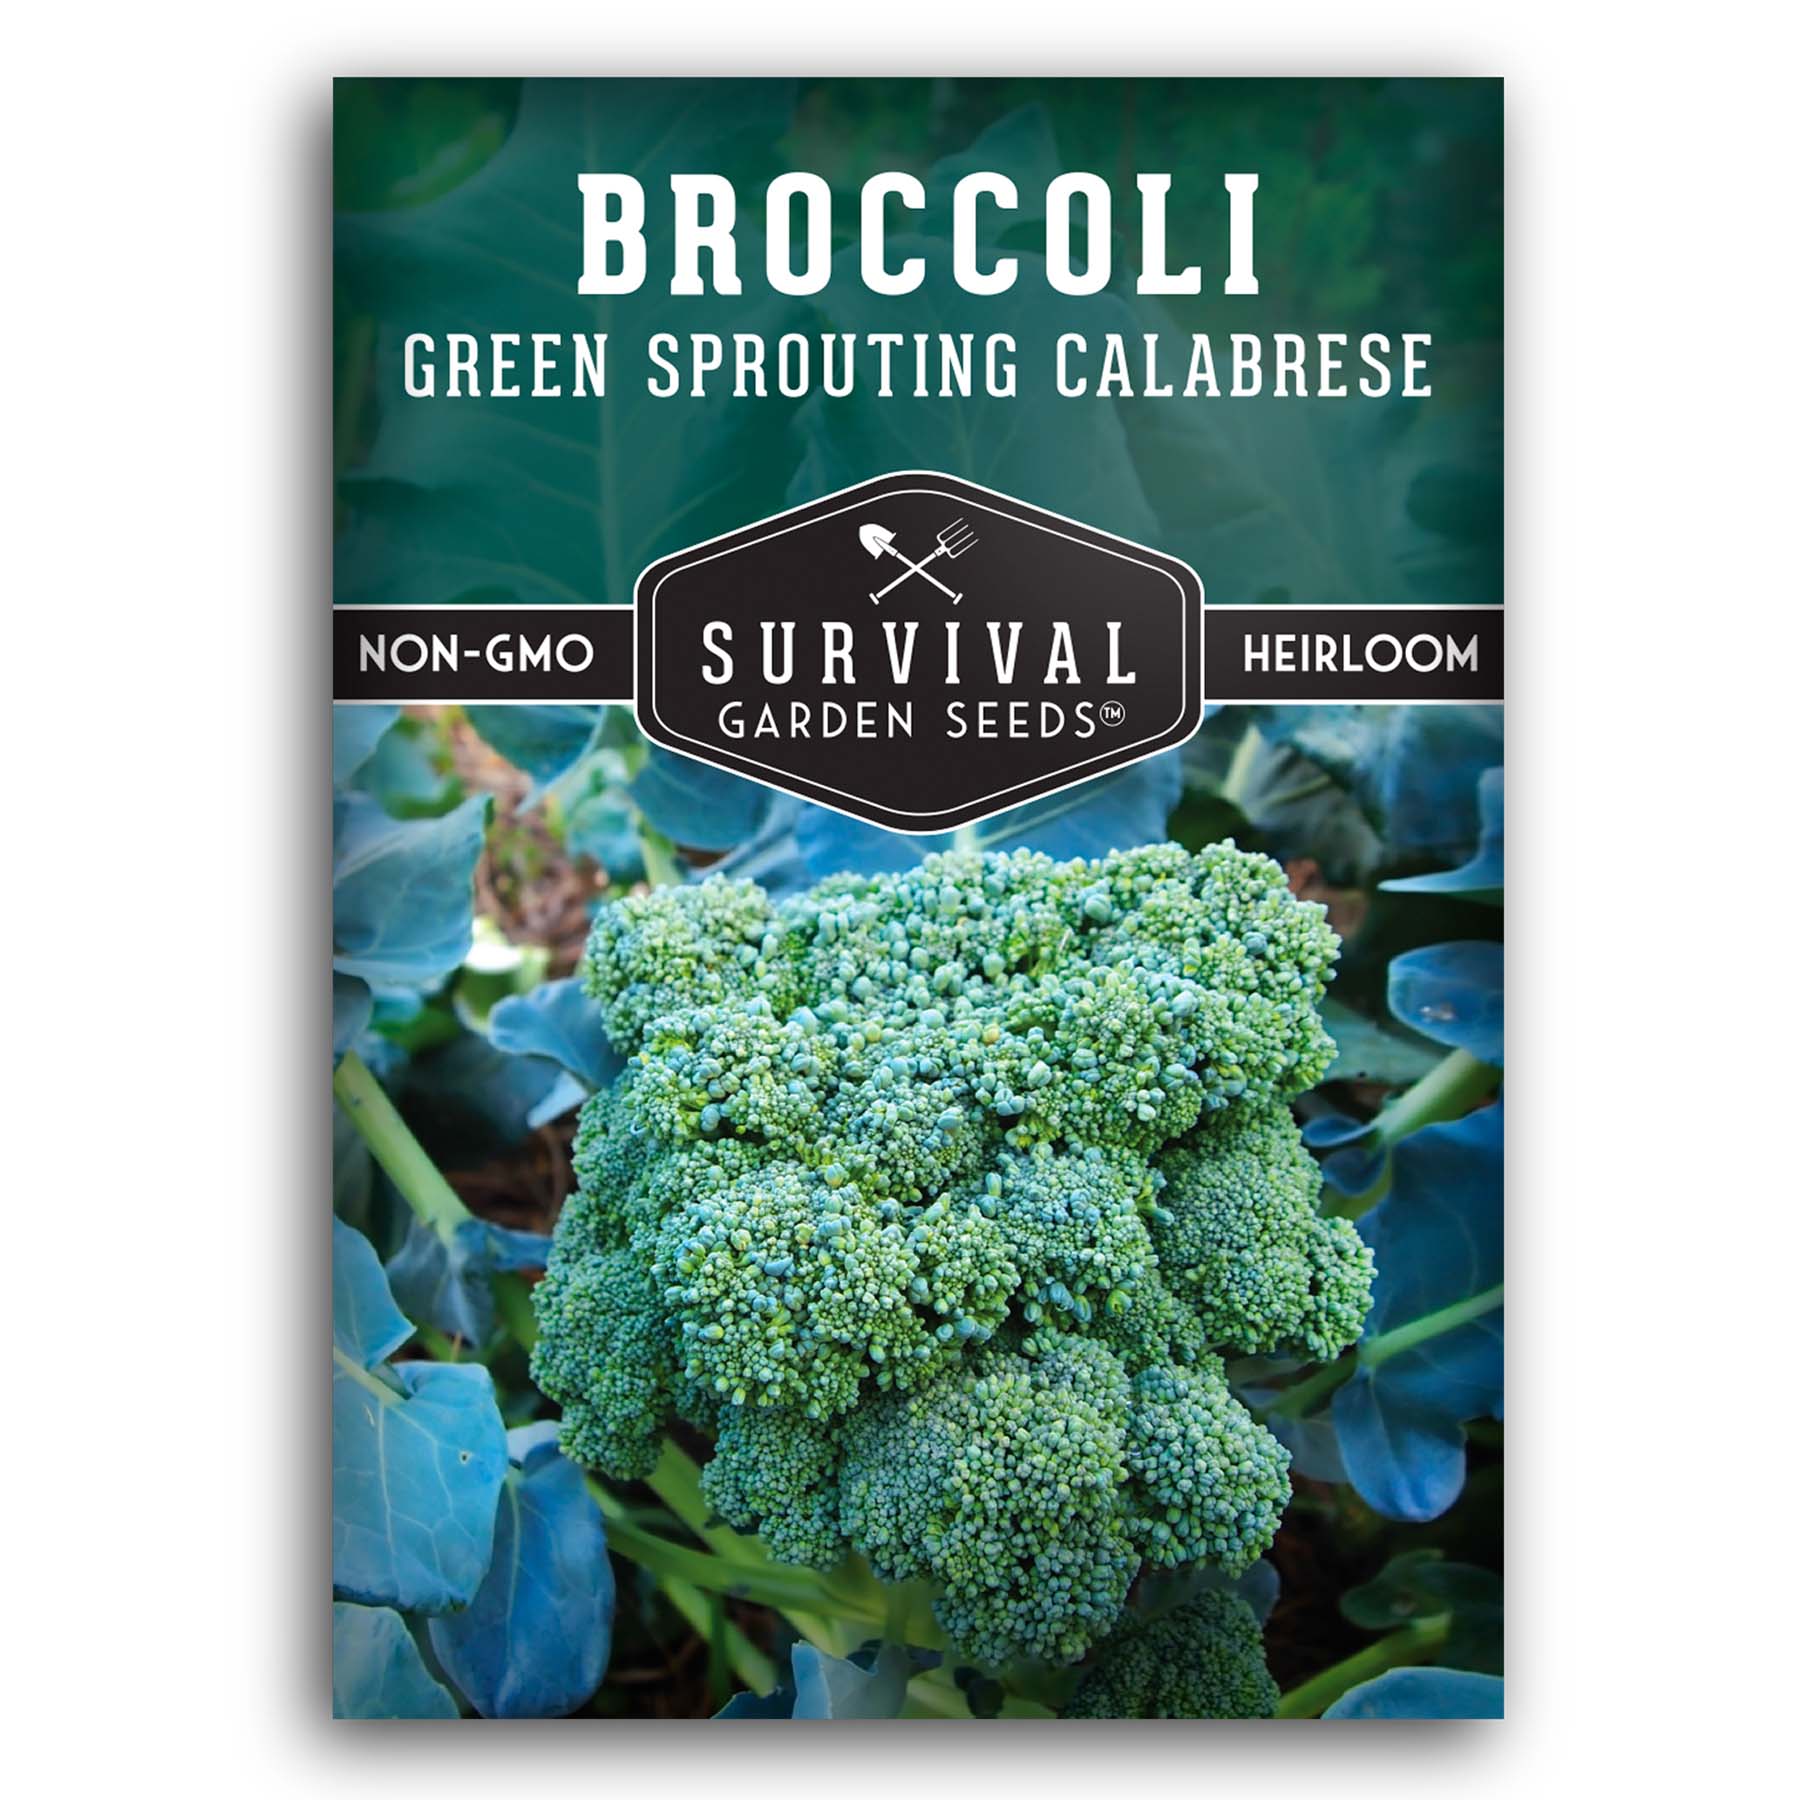 Green Sprouting Calabrese Broccoli seeds for planting